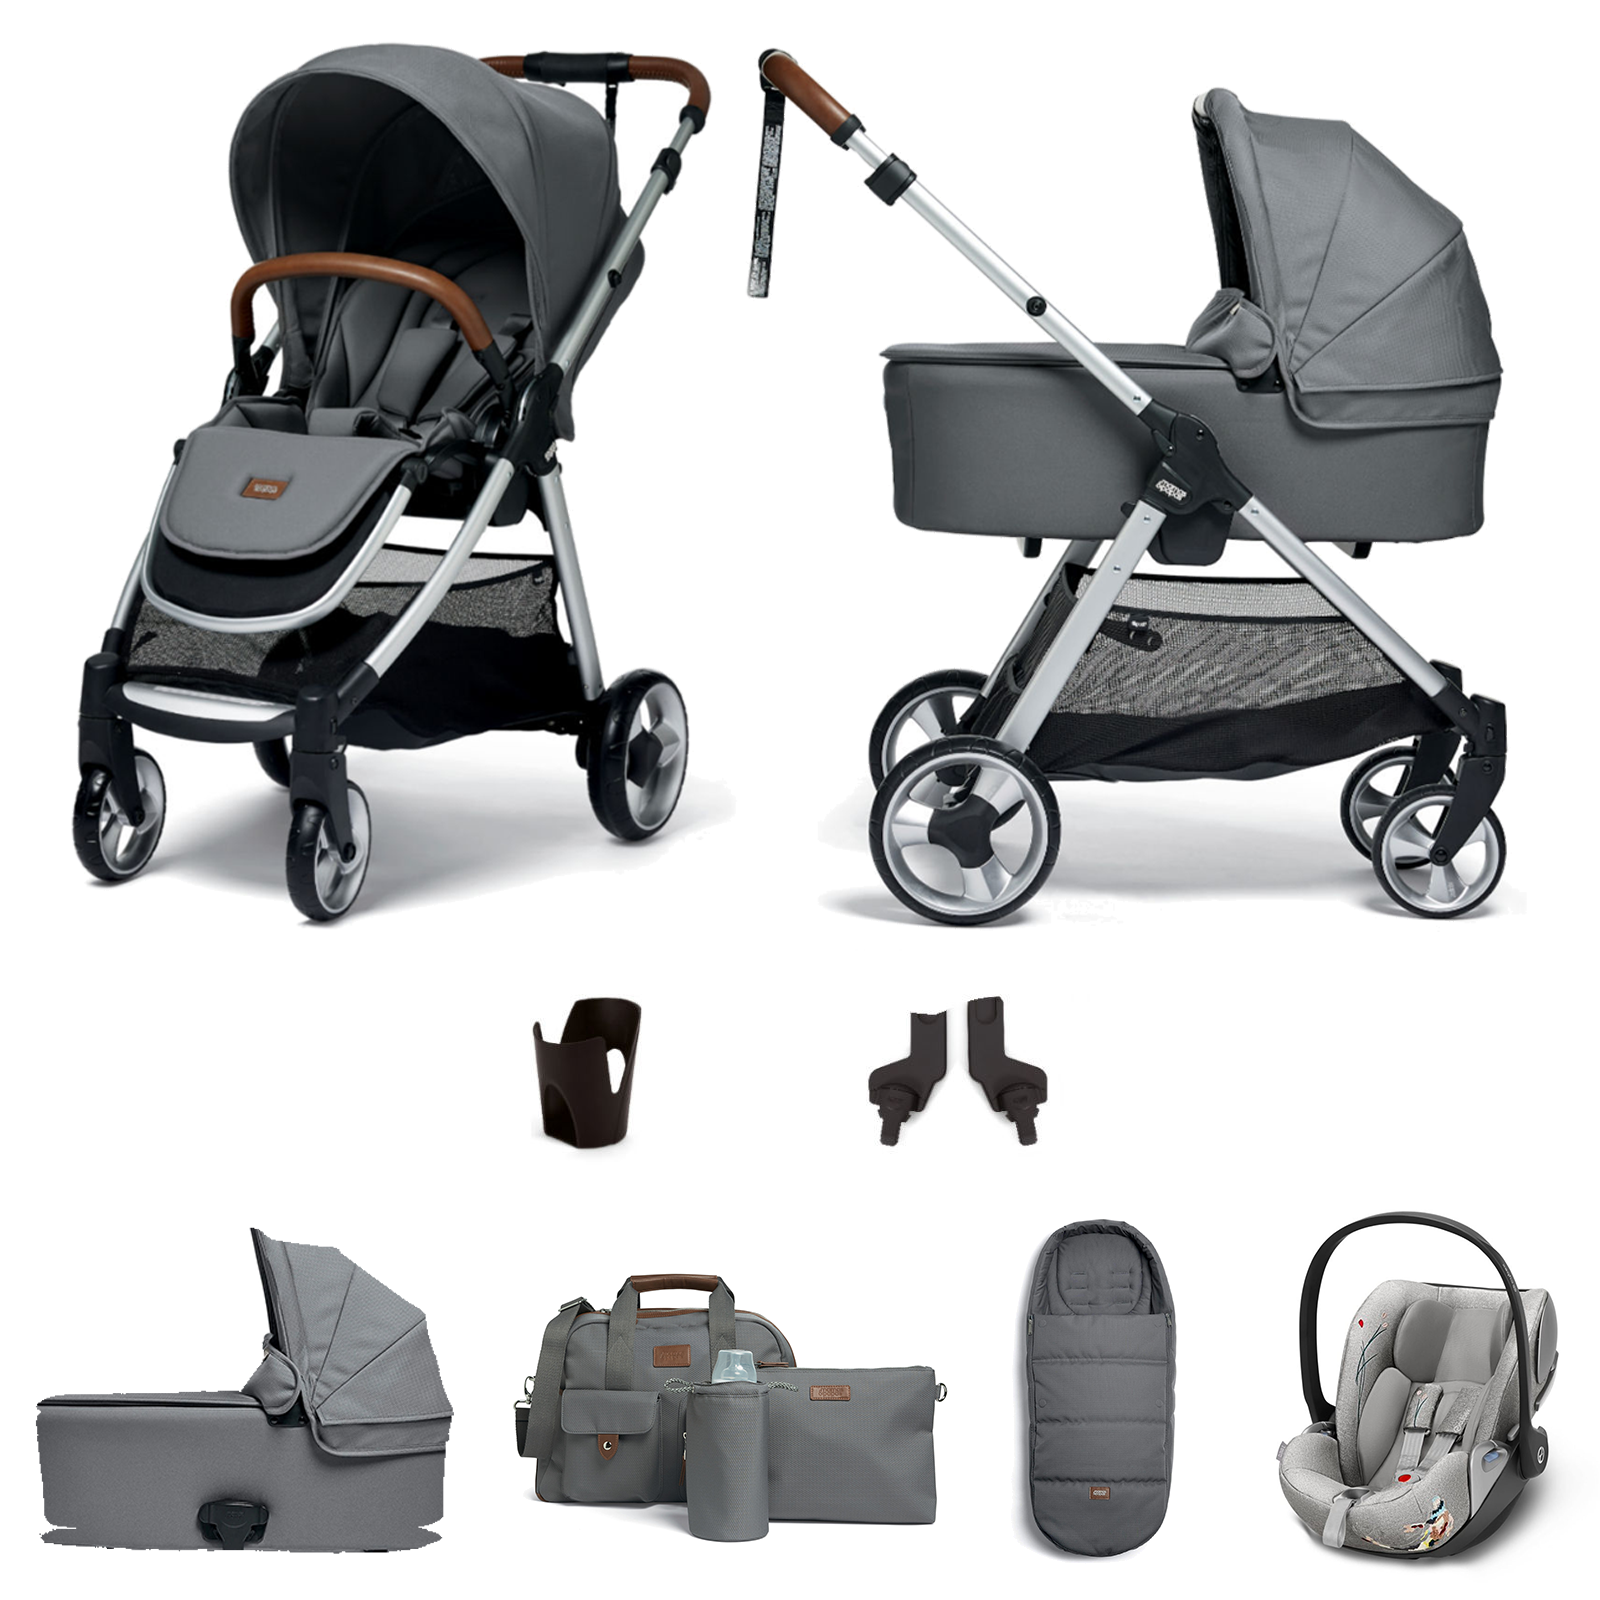 Mamas & Papas Flip XT2 Essentials (Cloud Z Car Seat) Travel System with Footmuff, Changing Bag & Carrycot - Fossil Grey